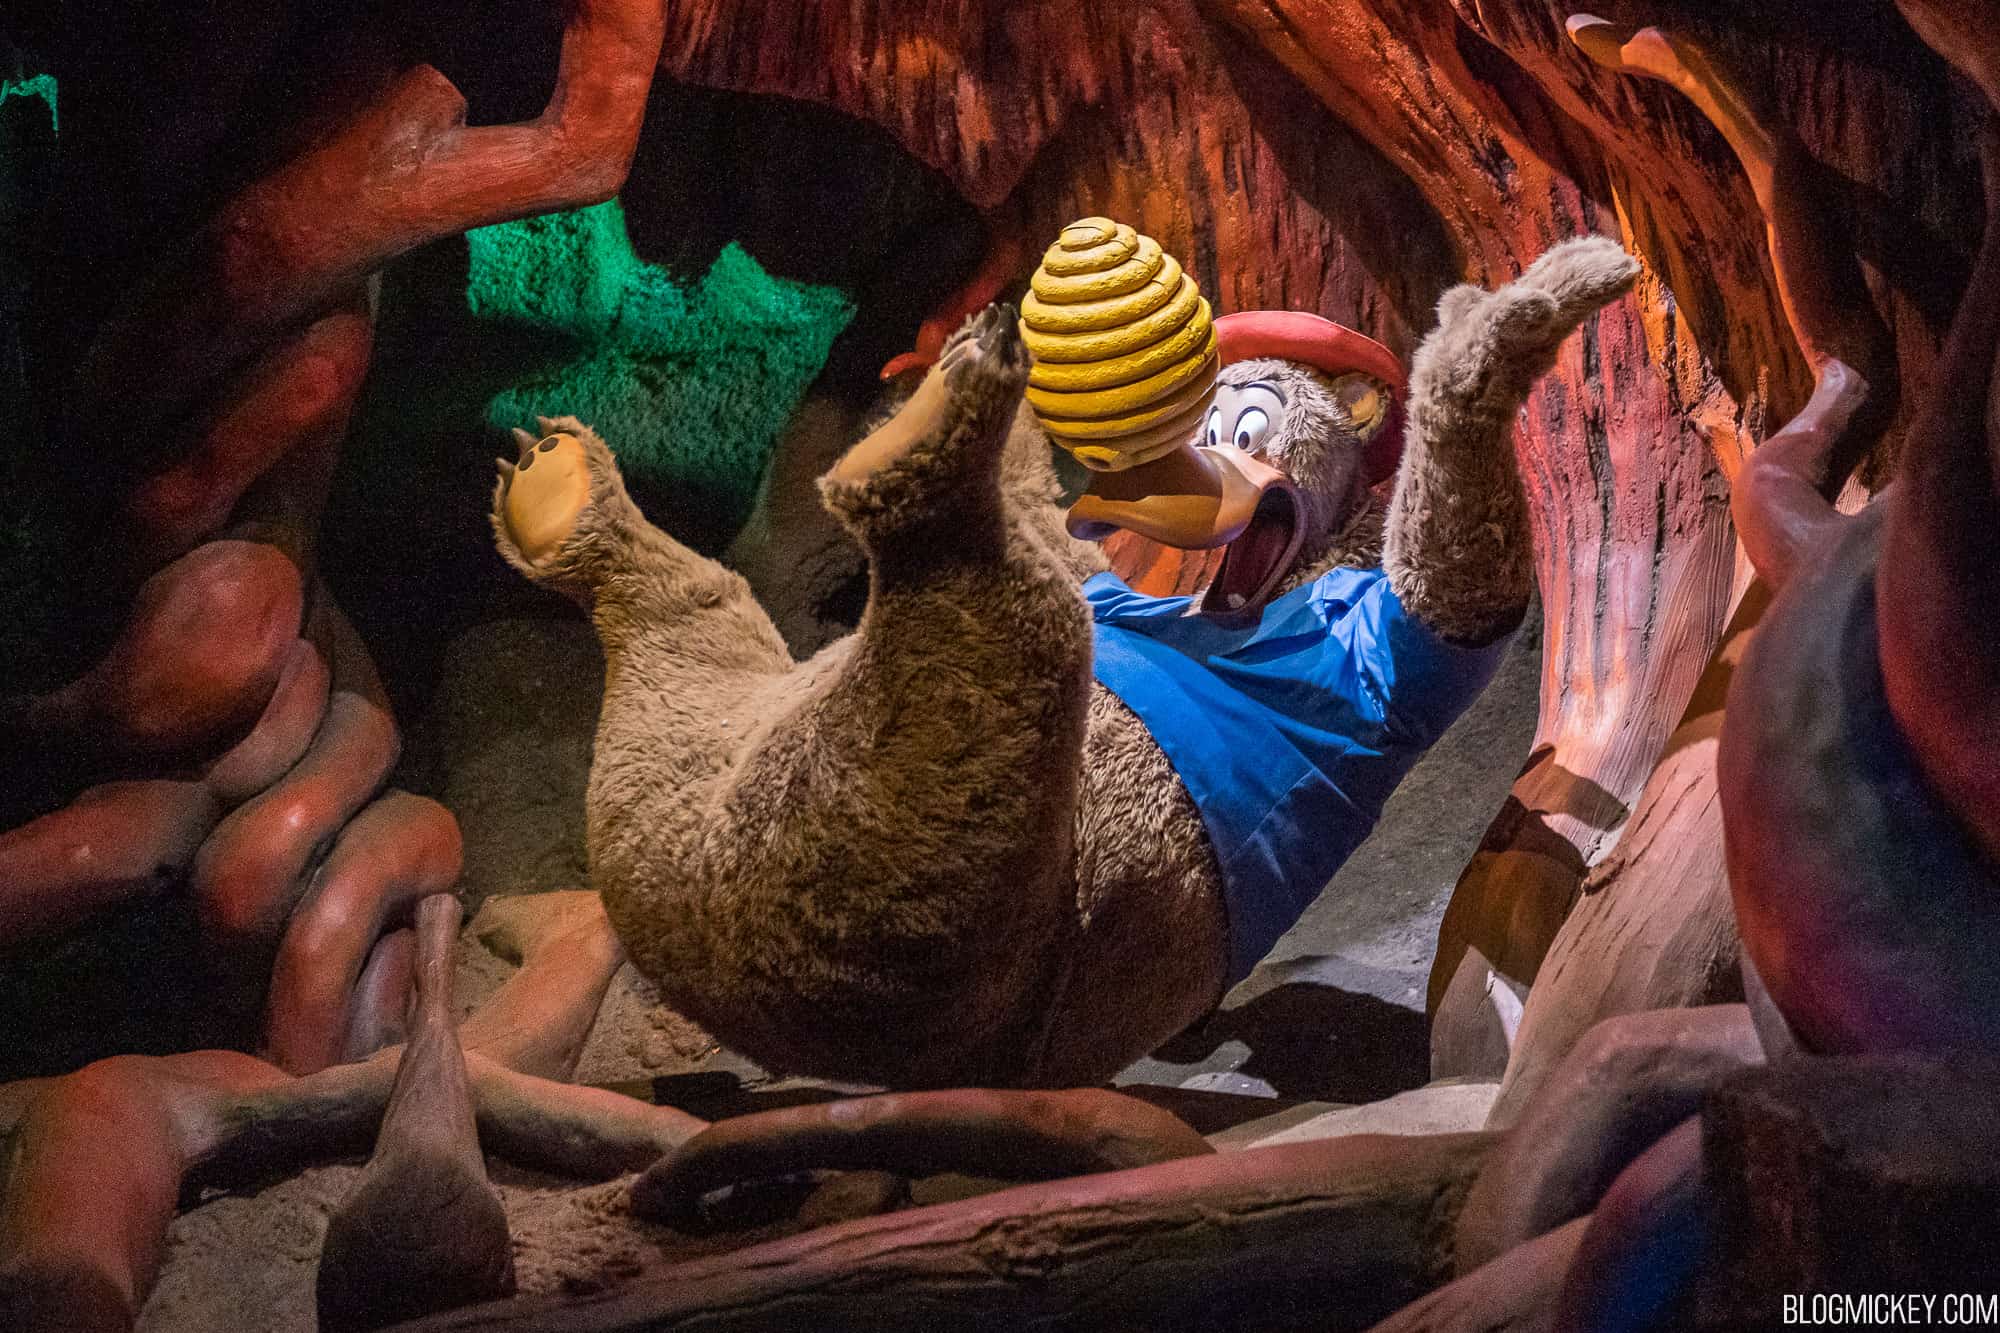 Imagineering Files Permit for Removal and Disposal of Hydraulics from Splash Mountain